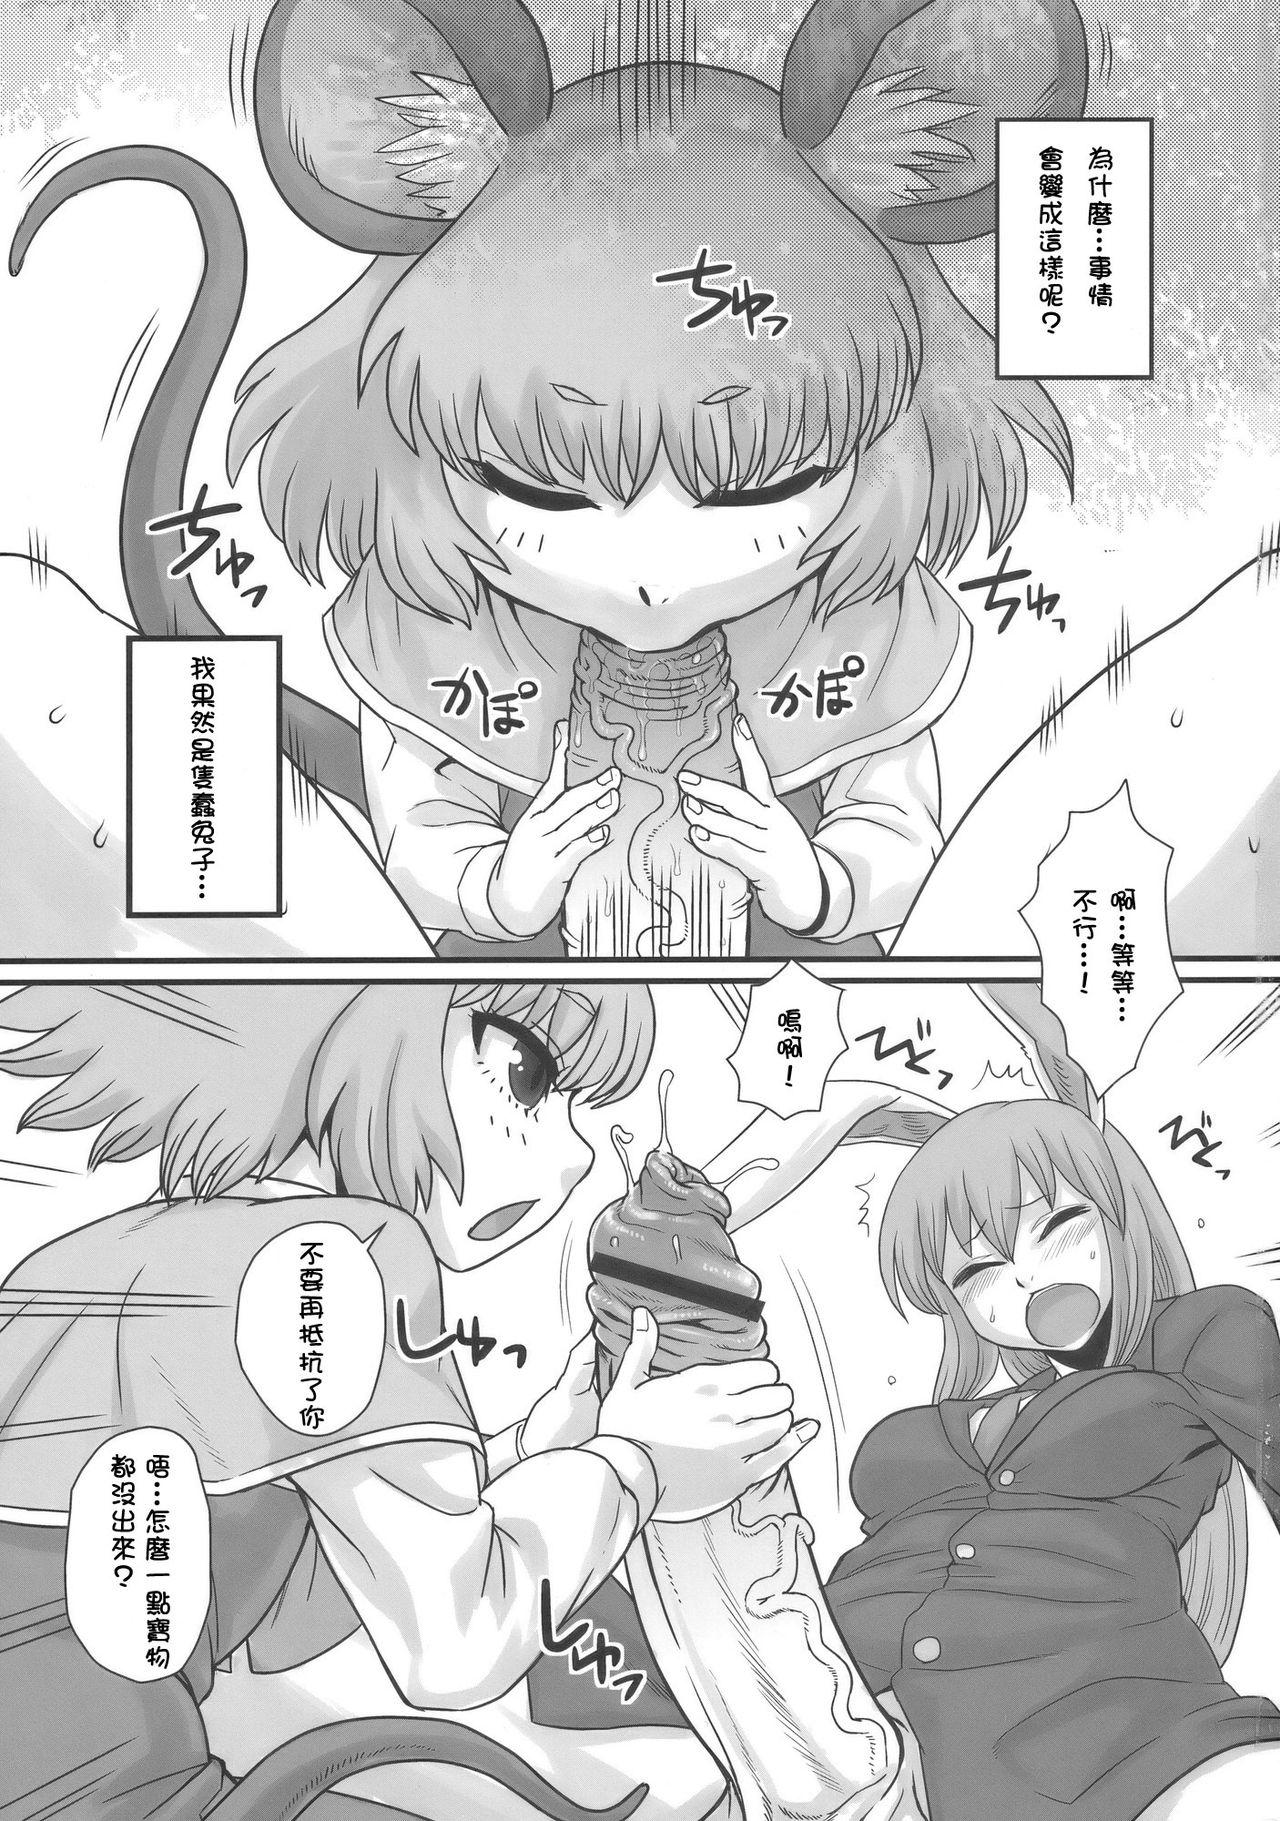 Cop Lunatic Udon - Touhou project People Having Sex - Page 3